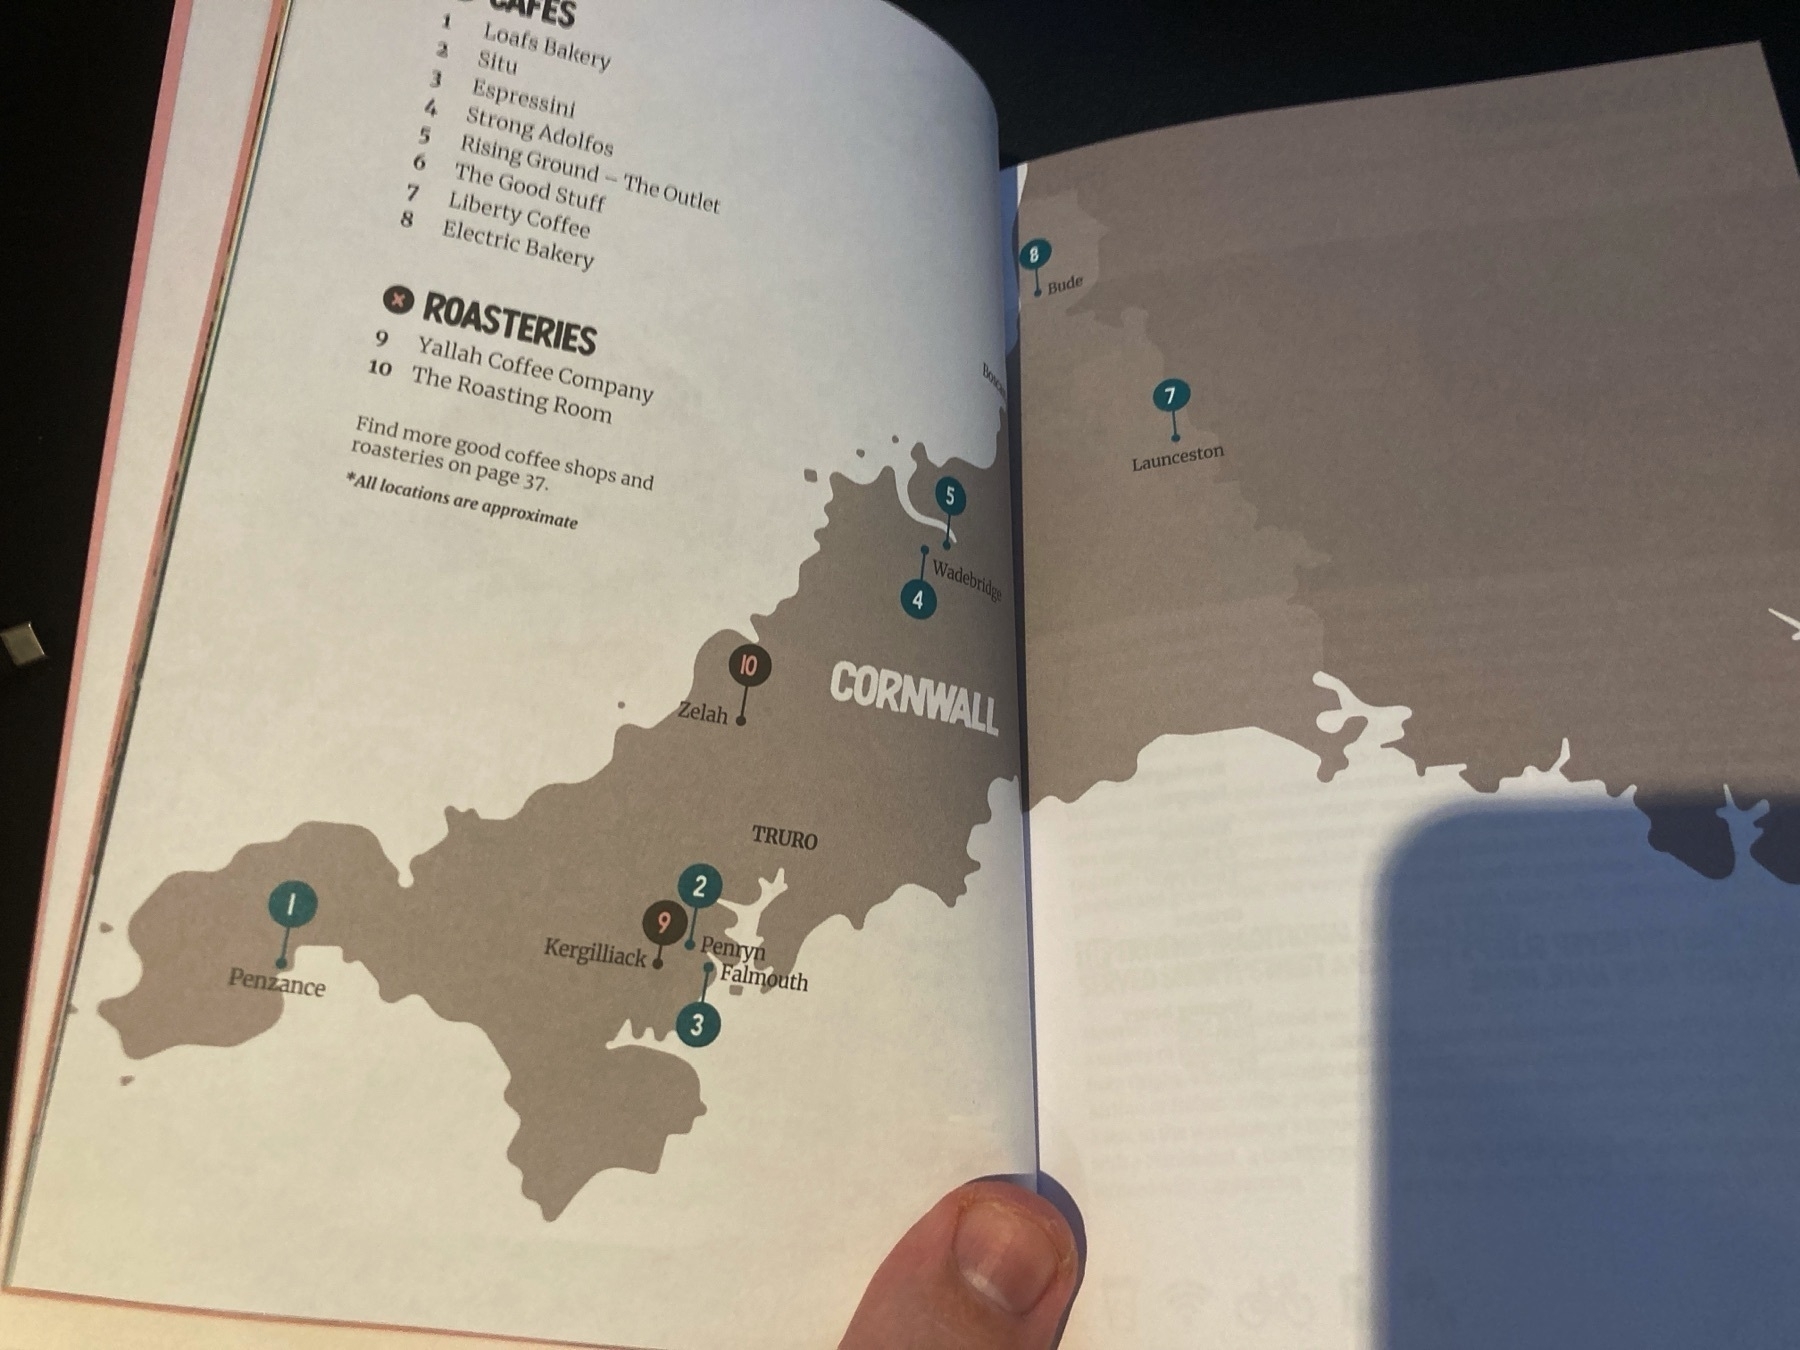 A book opened on a map that spreads across both pages; on the pages are pinned locations with numbers and their names attached. There is a list with the corresponding numbers and associated names of independent coffee shops and roasteries.